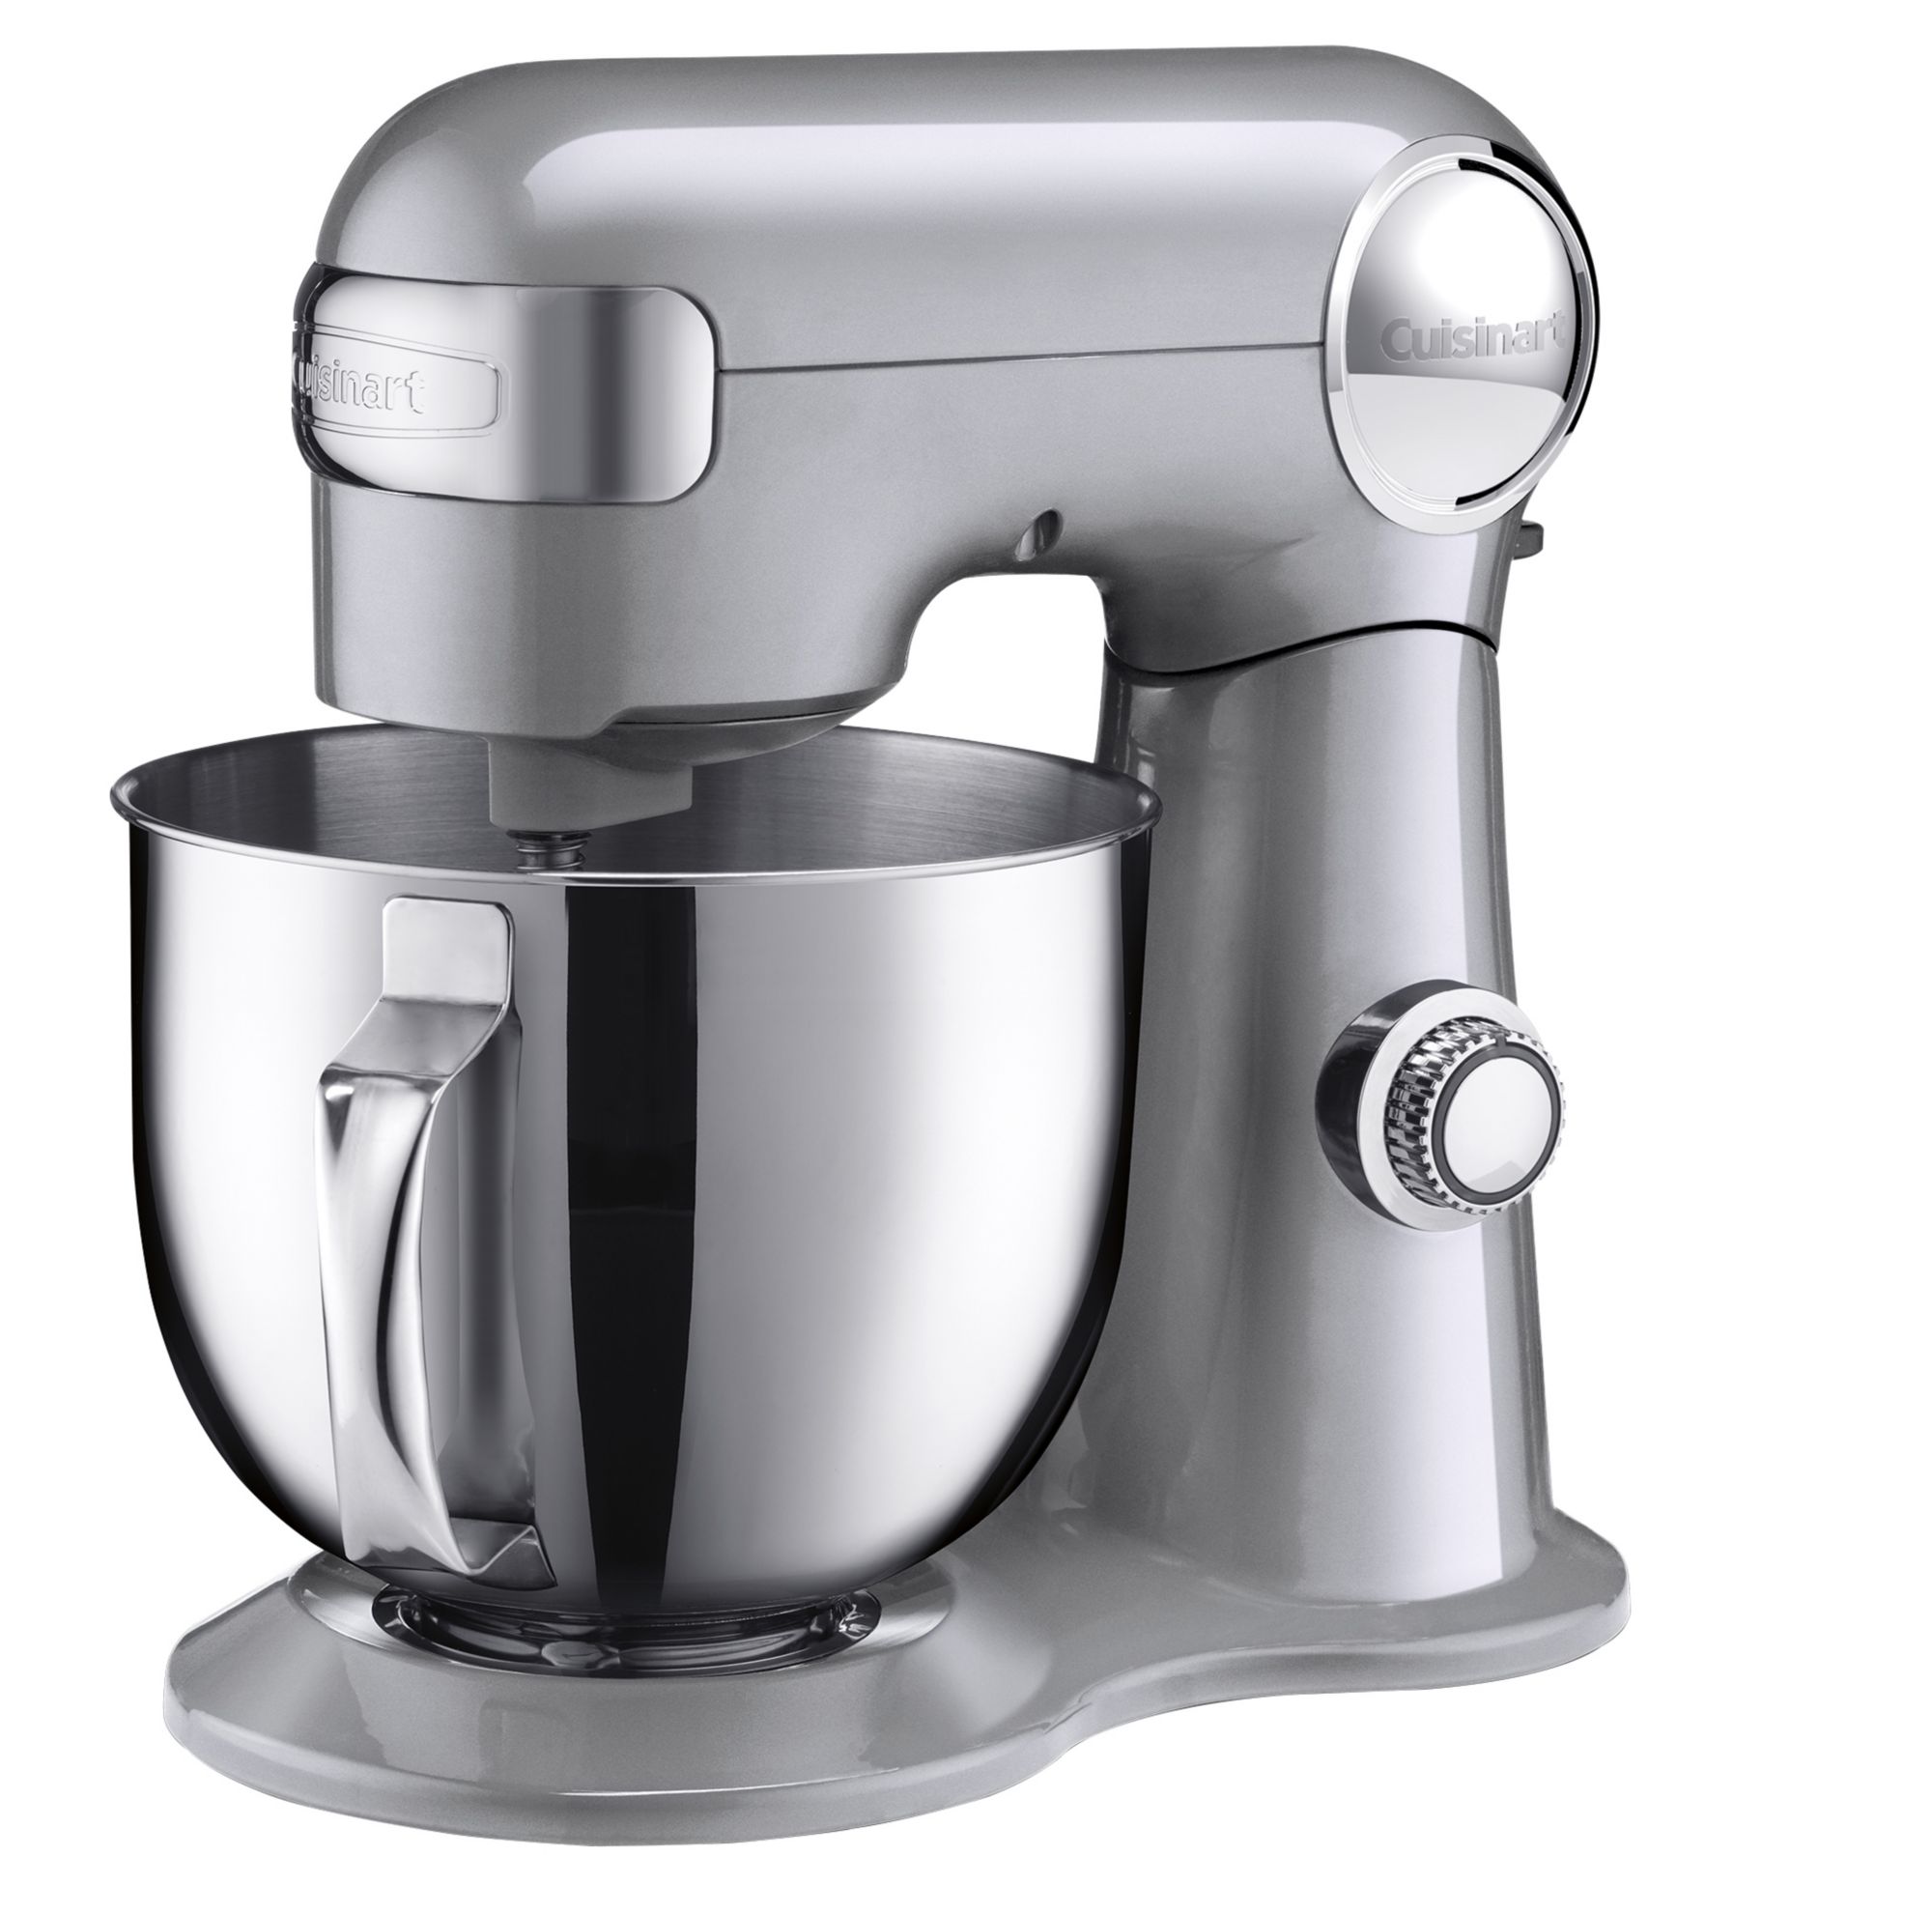 Upgrade Your Mixing Game: Stainless Steel Paddle Attachment Review Video  for Kitchenaid Mixer 